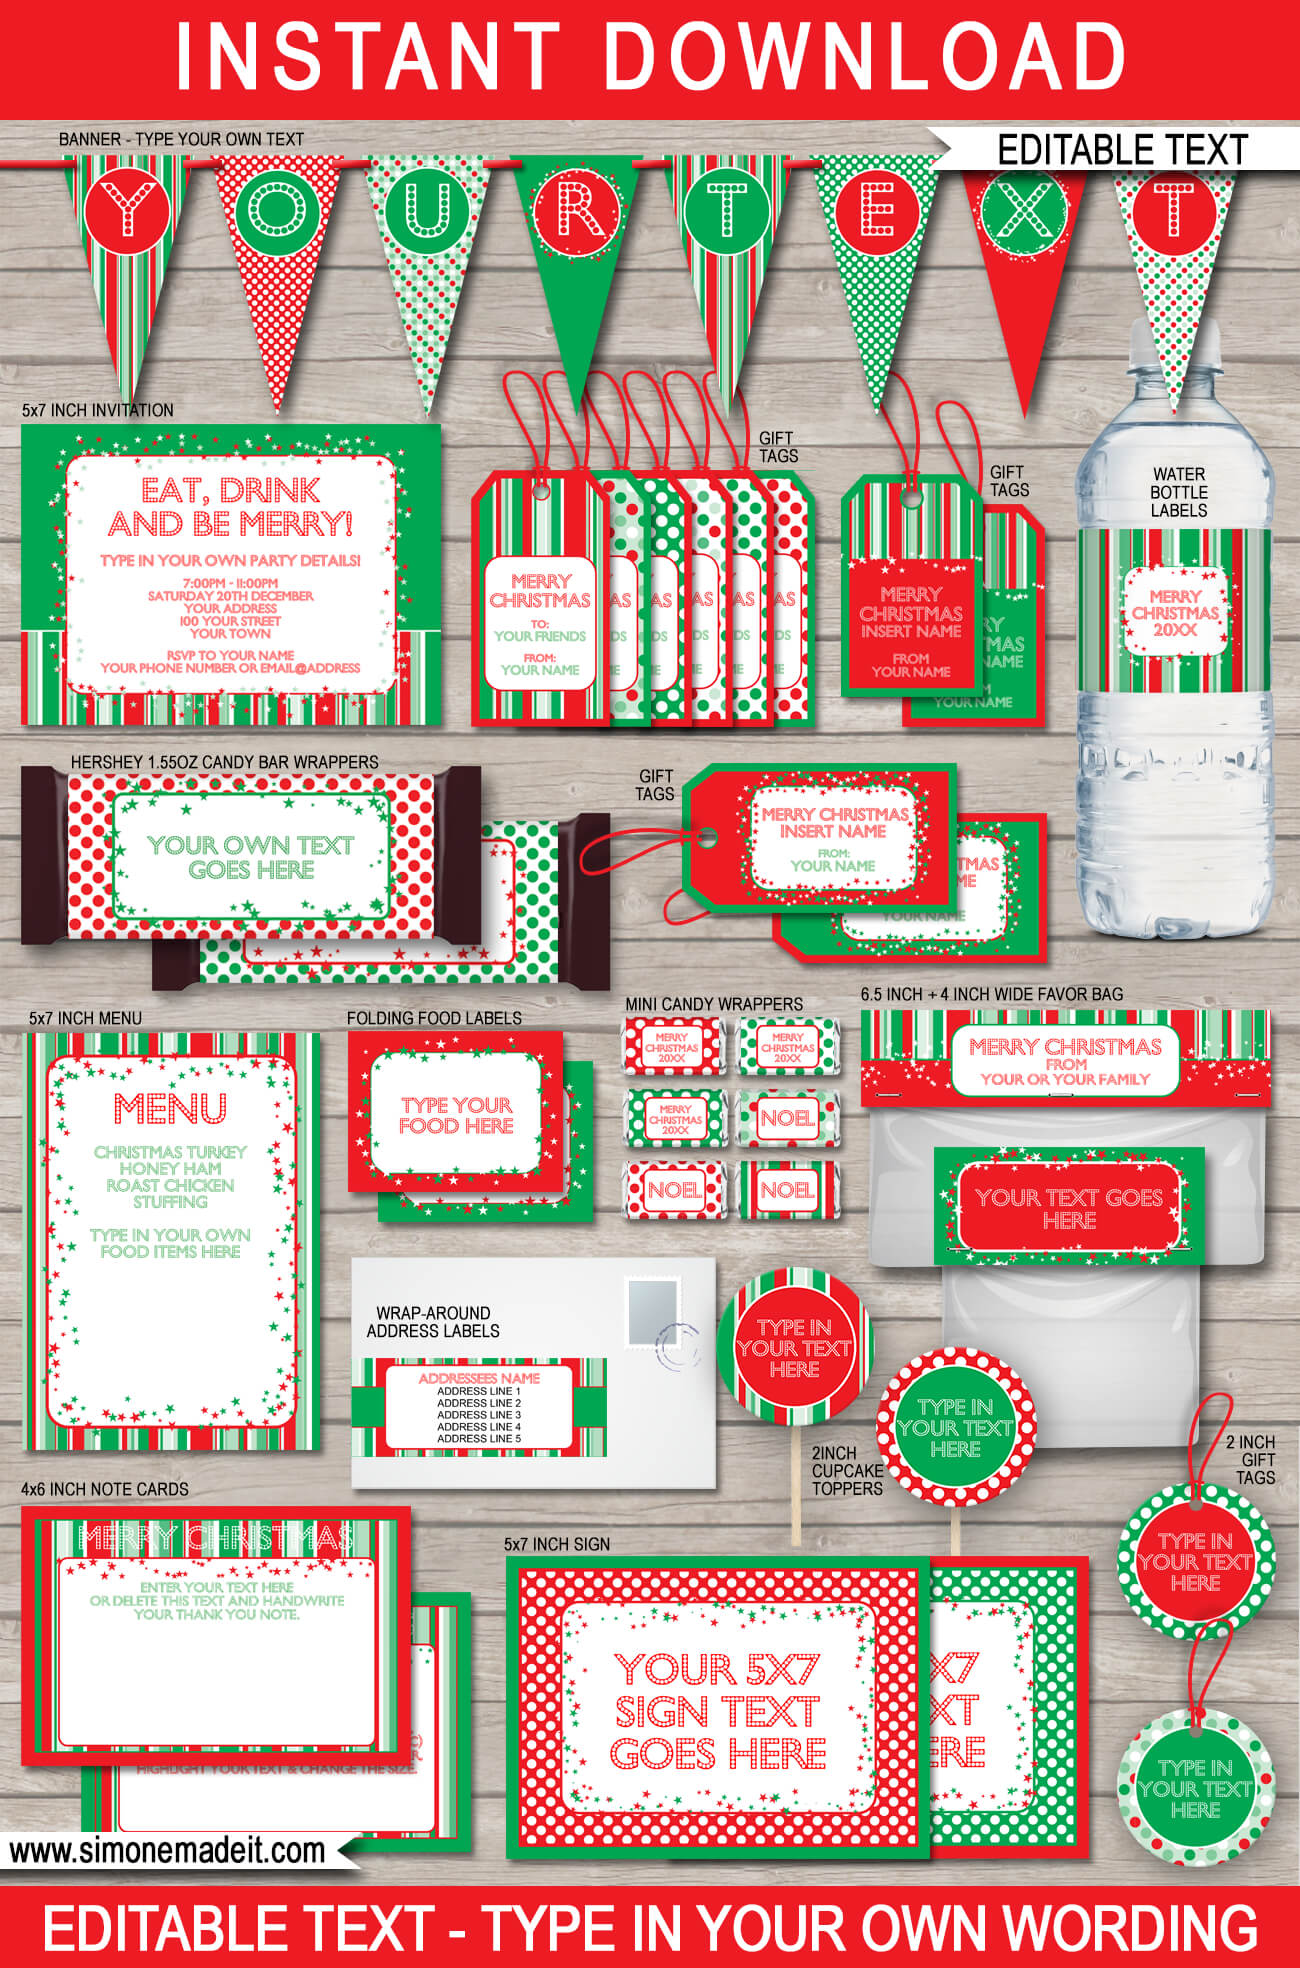 Christmas Party Printables, Invitations & Decorations | Gift Tags | Editable Theme Templates | INSTANT DOWNLOAD $9.00 via SIMONEmadeit.com